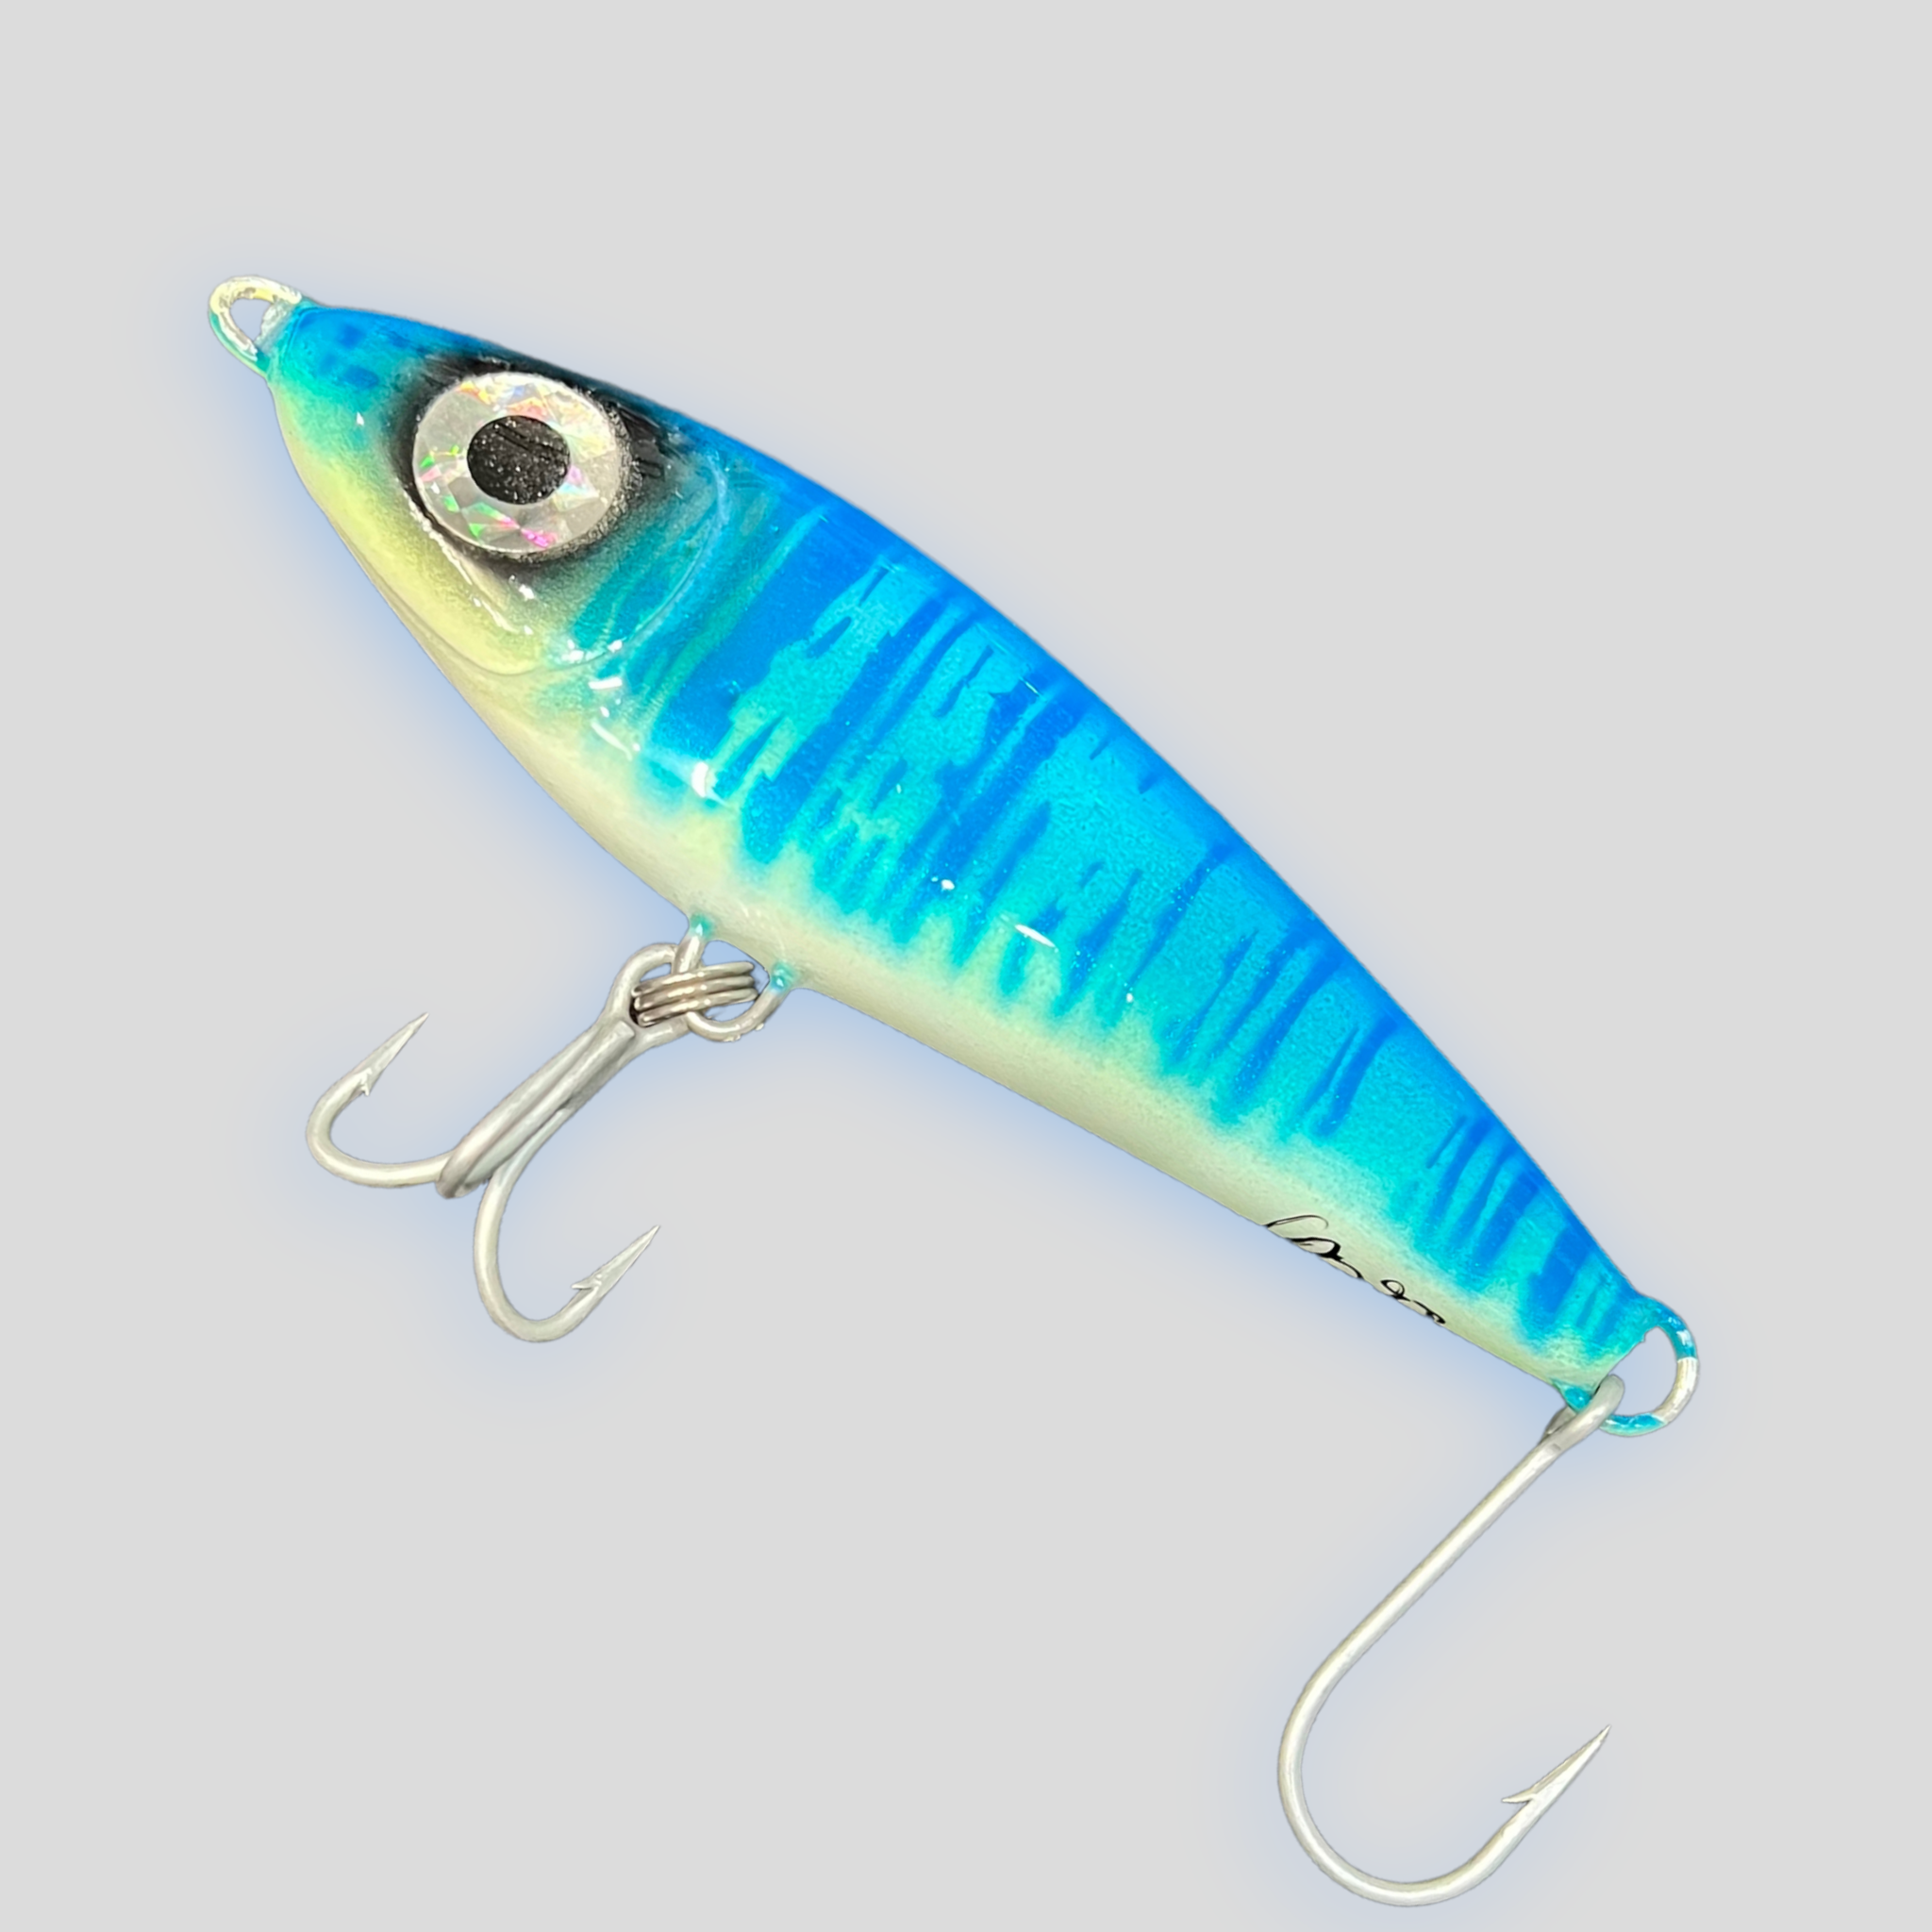 Cape Cod Canal Striped Bass Fishing Ron Arra Surf Lures  Striped bass  fishing, Saltwater fishing lures, Saltwater lures